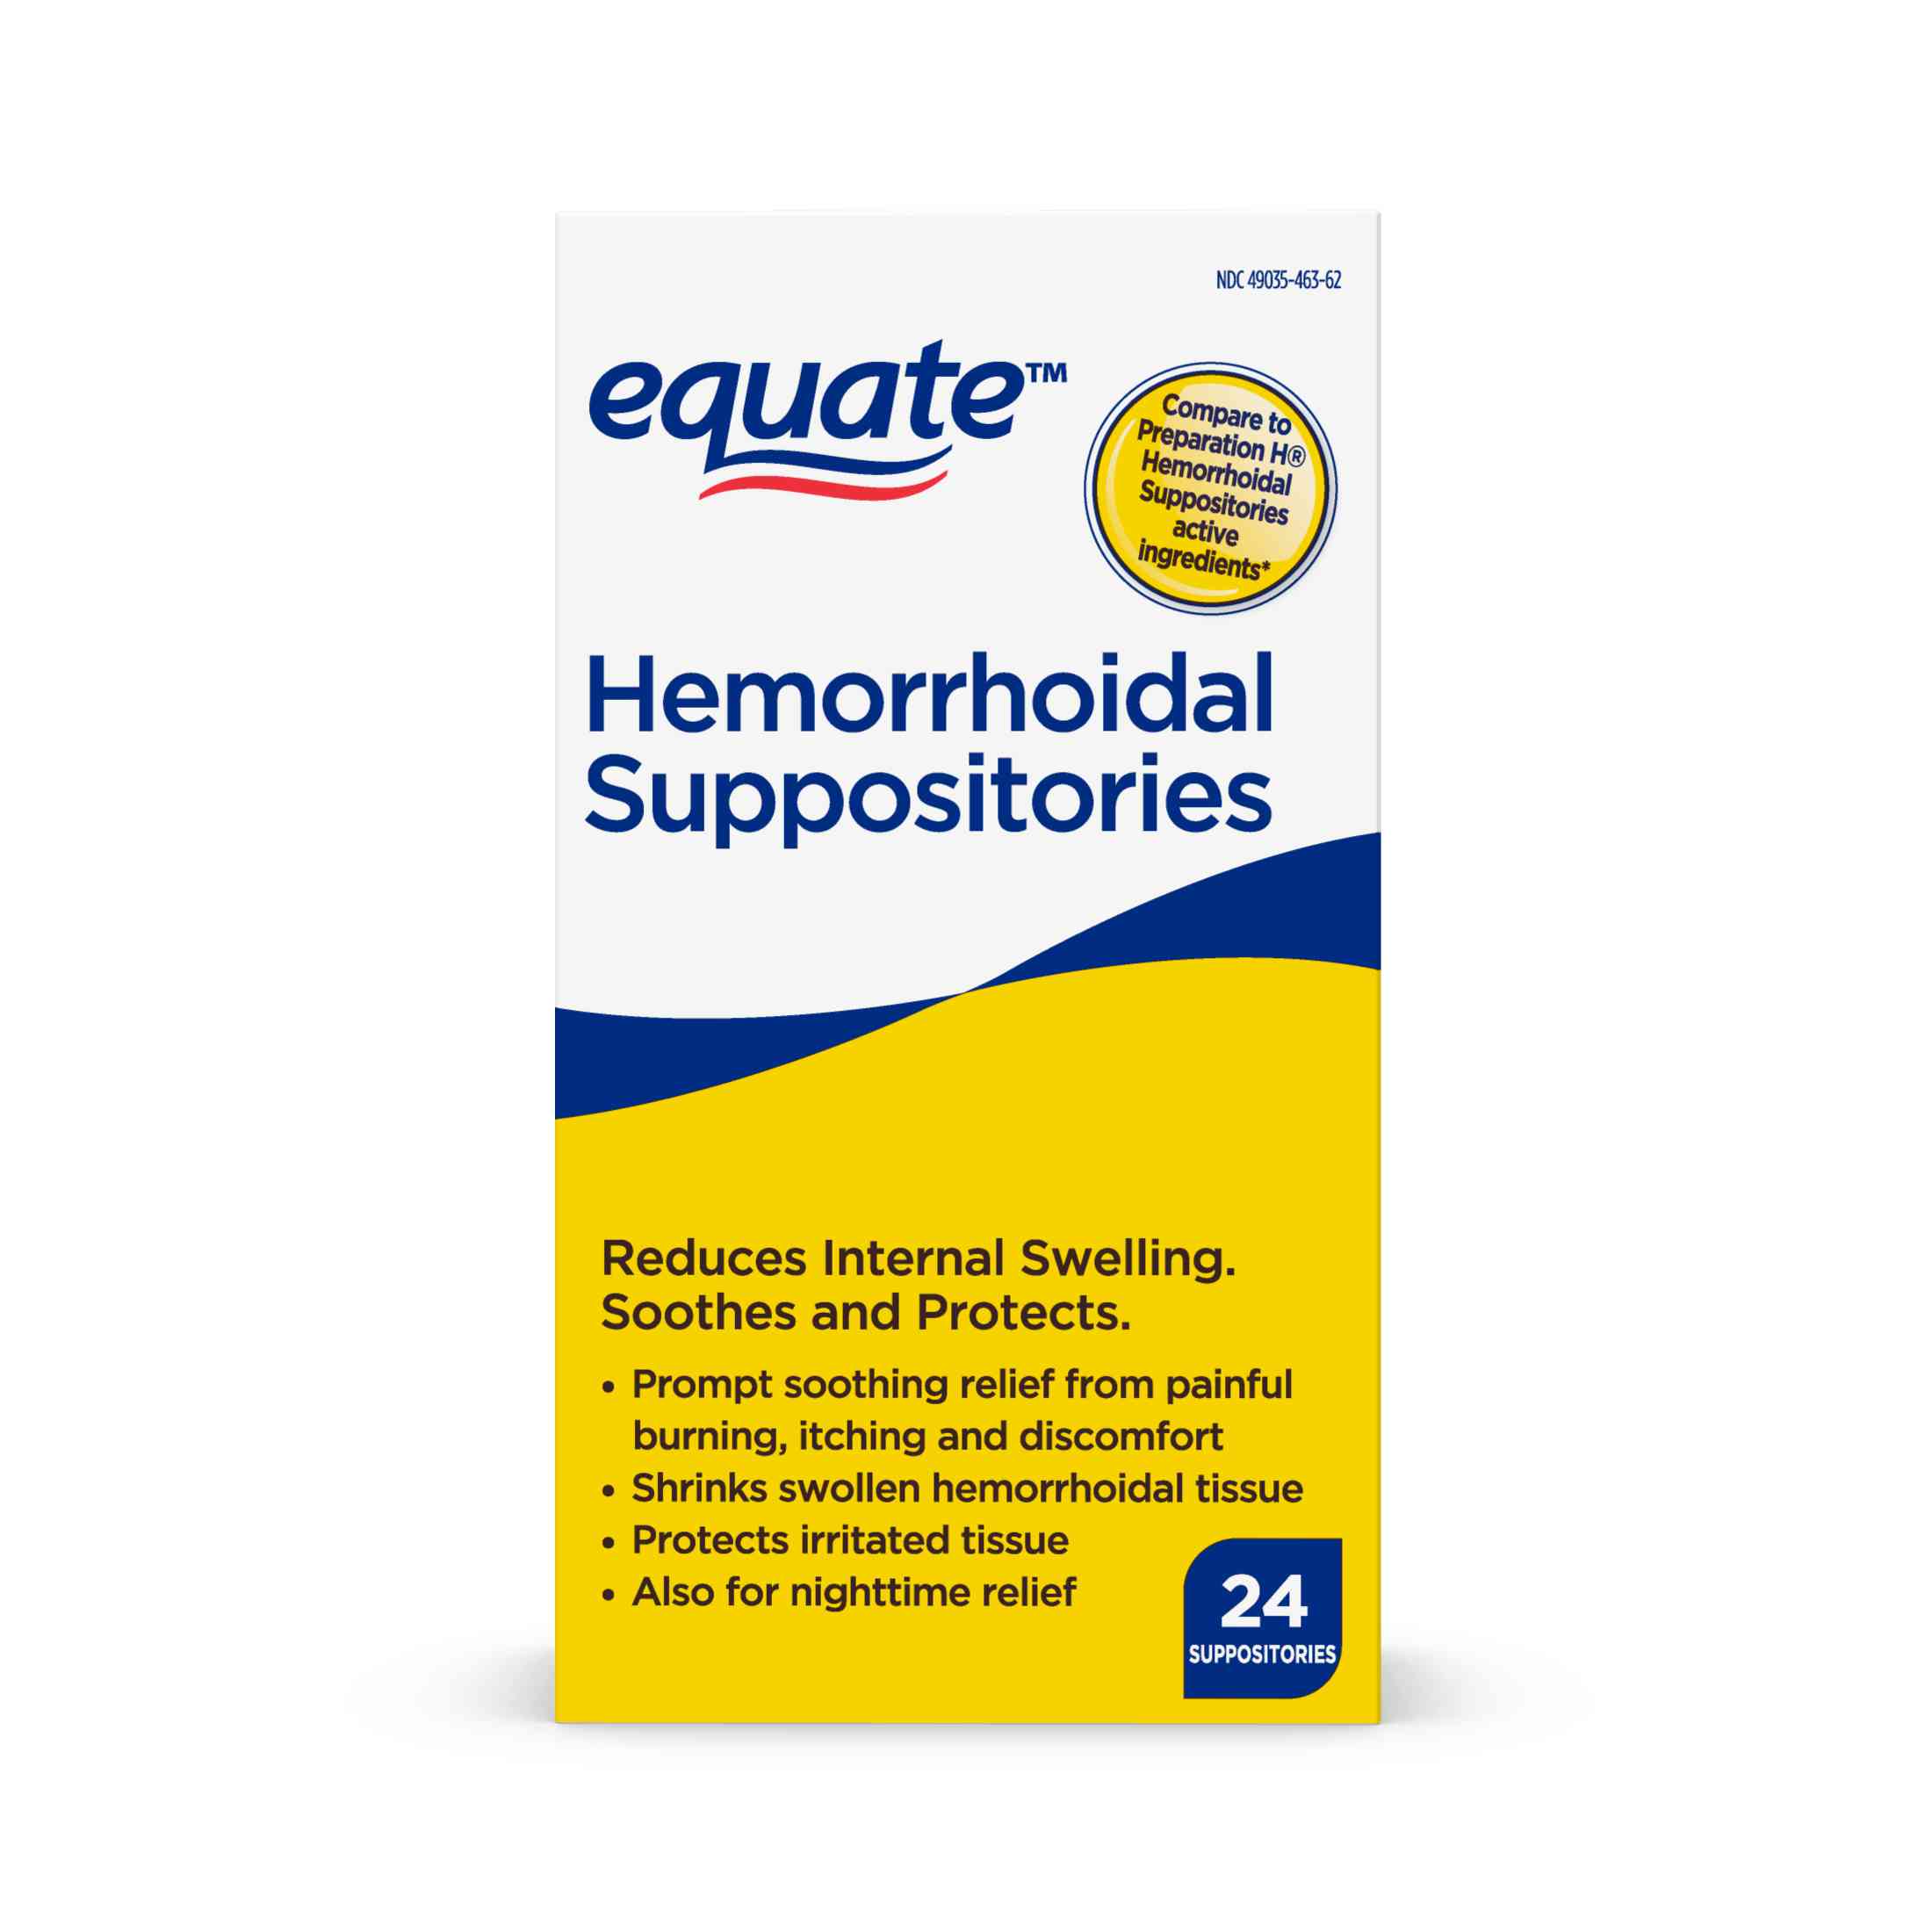 Equate Hemorrhoidal Suppositories, Relief from Burning, Itching and Discomfort of Hemorrhoids, 24 Count - image 1 of 8